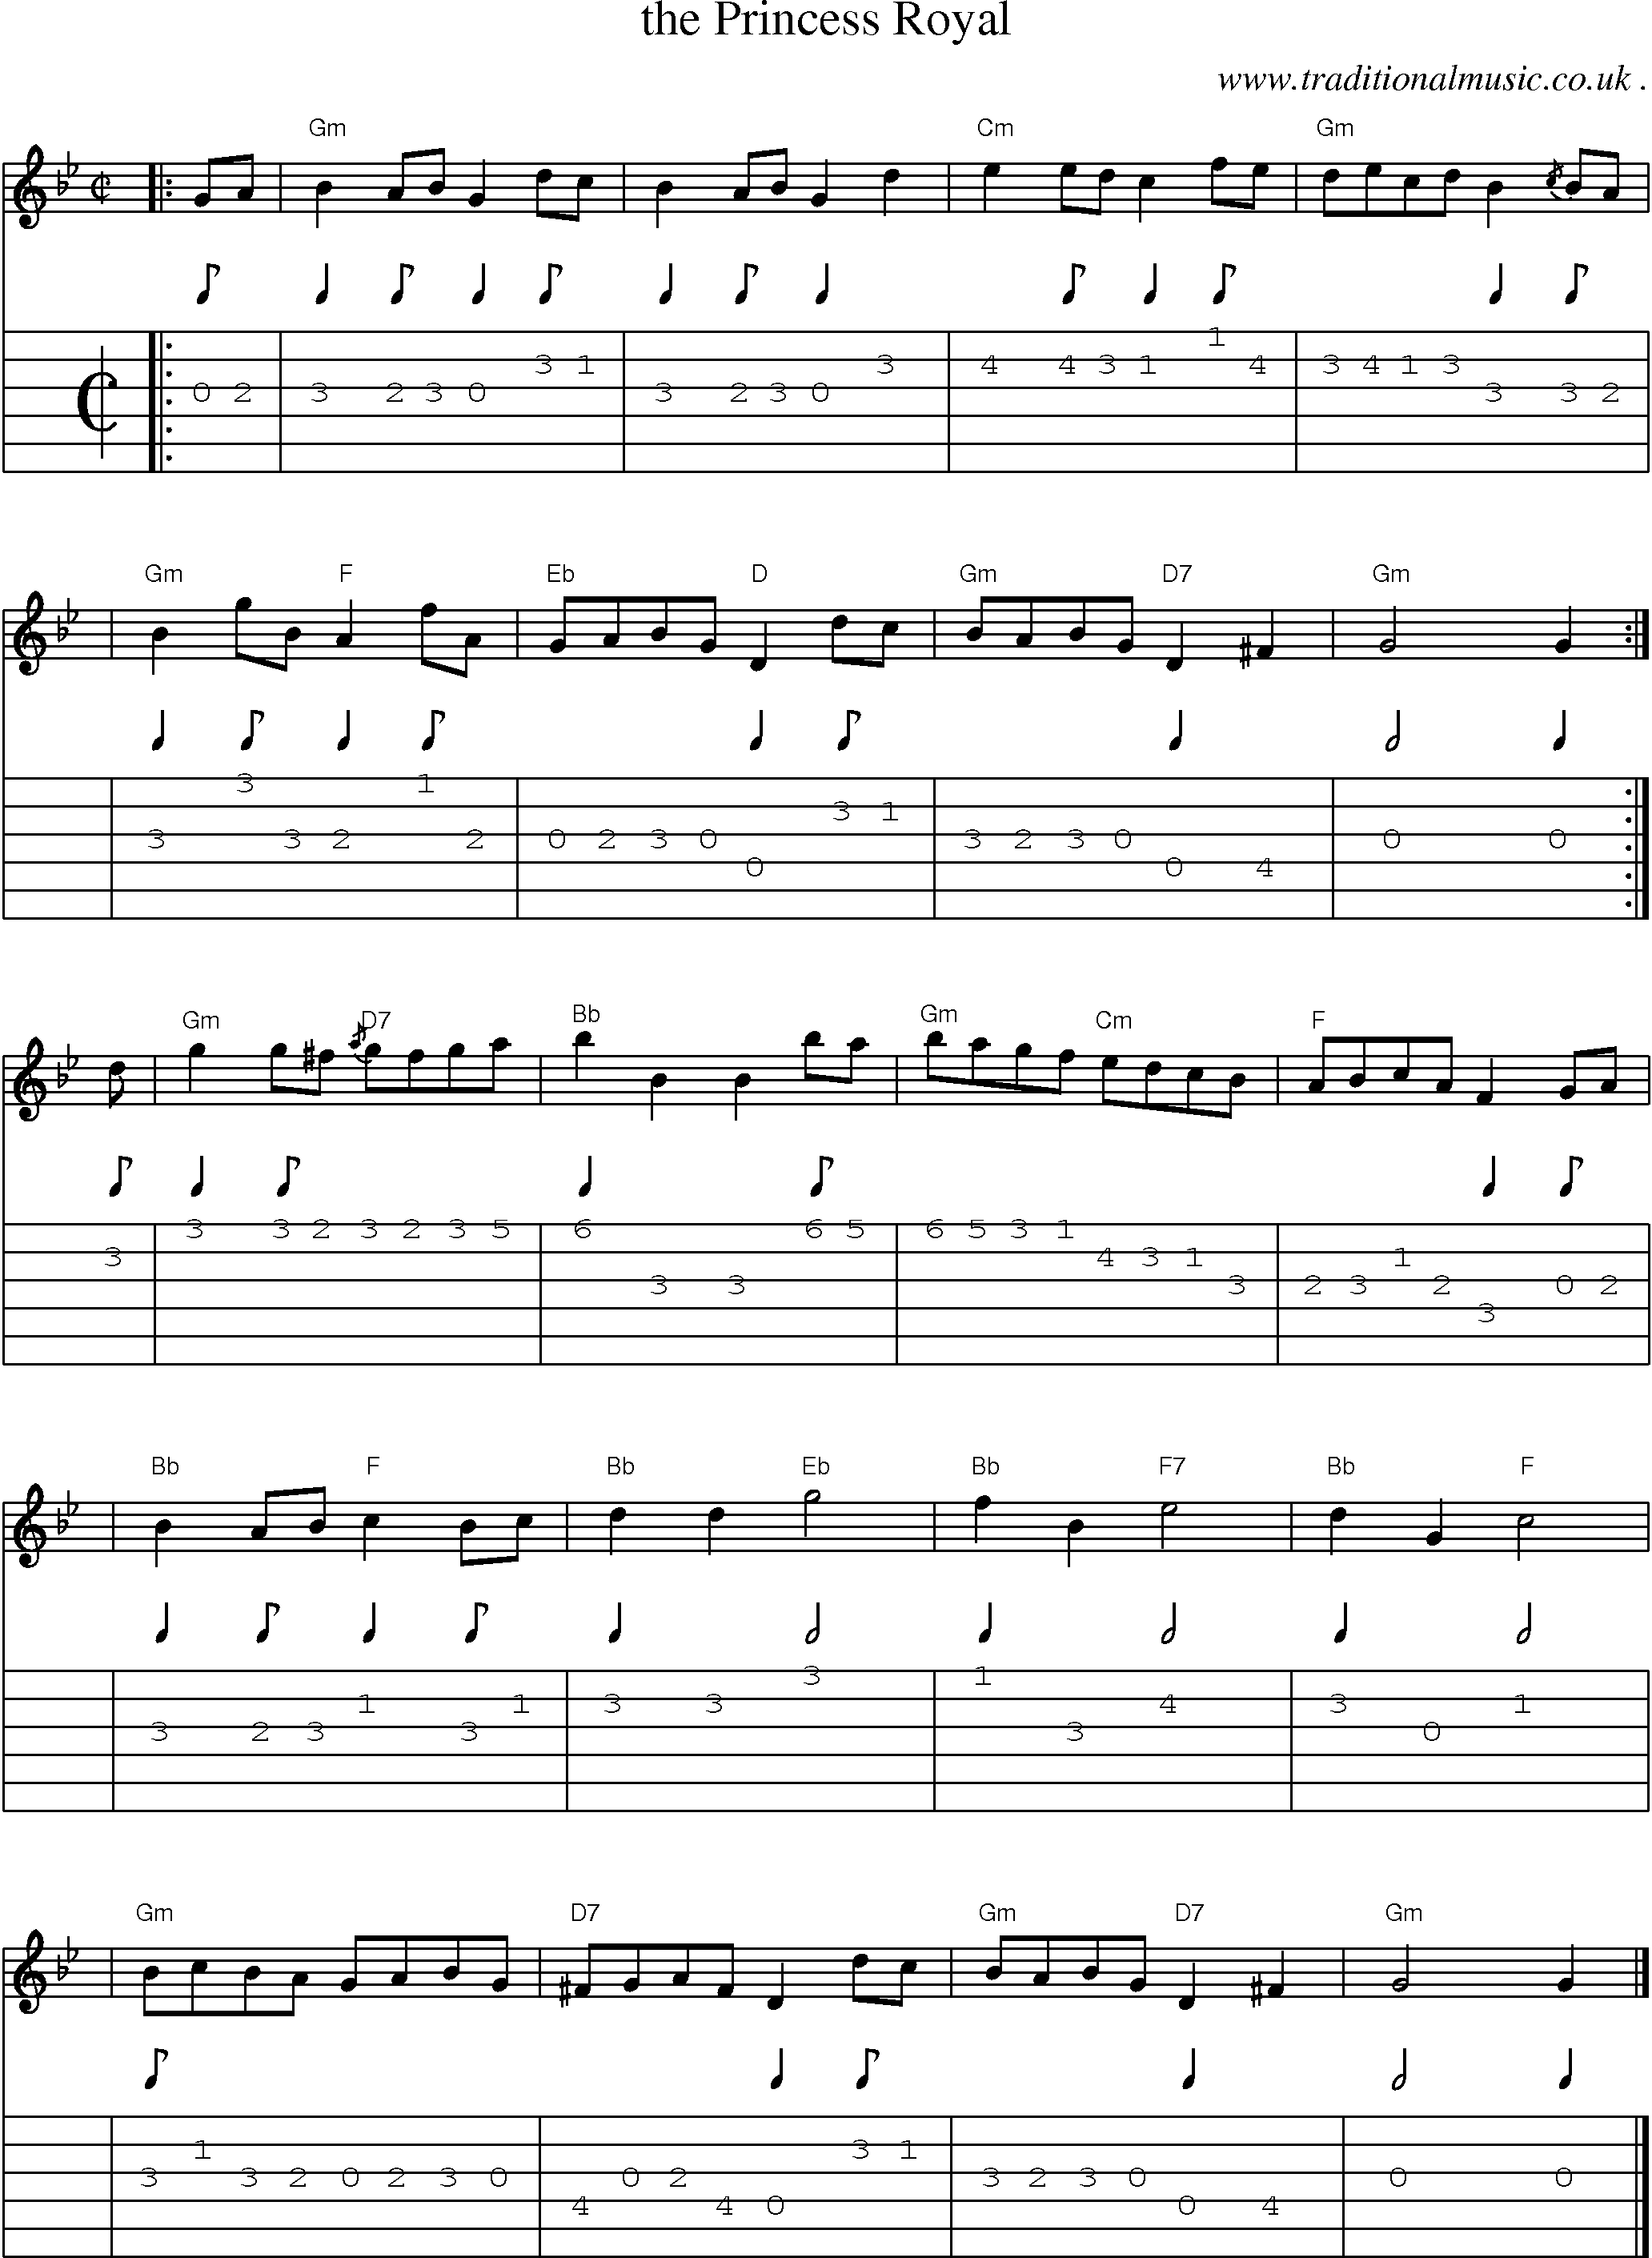 Sheet-music  score, Chords and Guitar Tabs for The Princess Royal